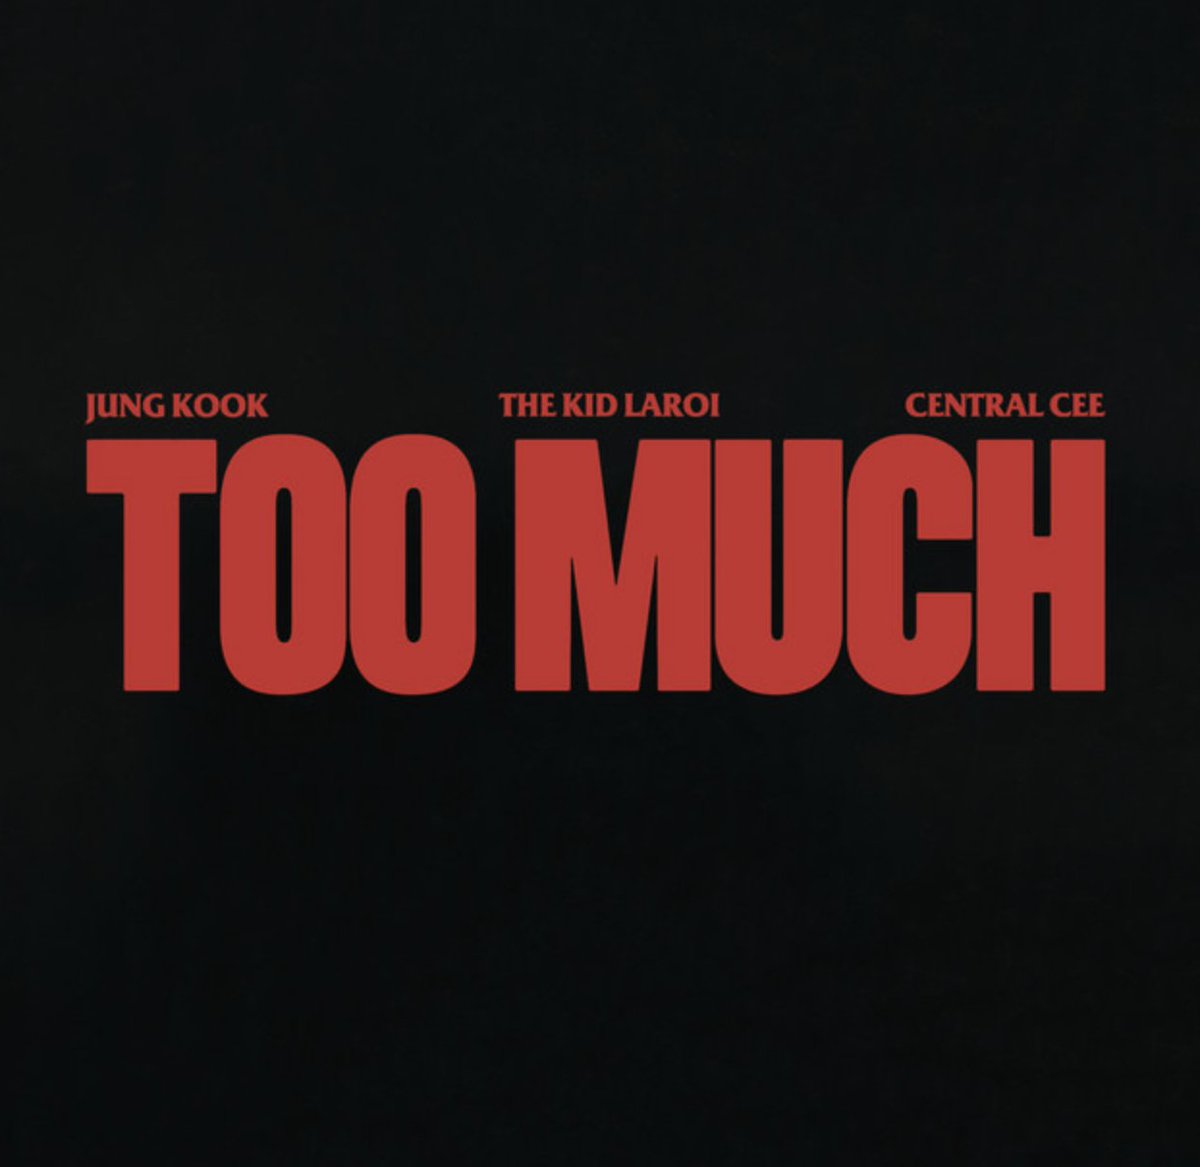 'TOO MUCH' by Jungkook, The KID LAROI, and Central Cee is out now! Spotify: open.spotify.com/track/0rKWJnmo… MV: youtu.be/83Lv790h79k?si…